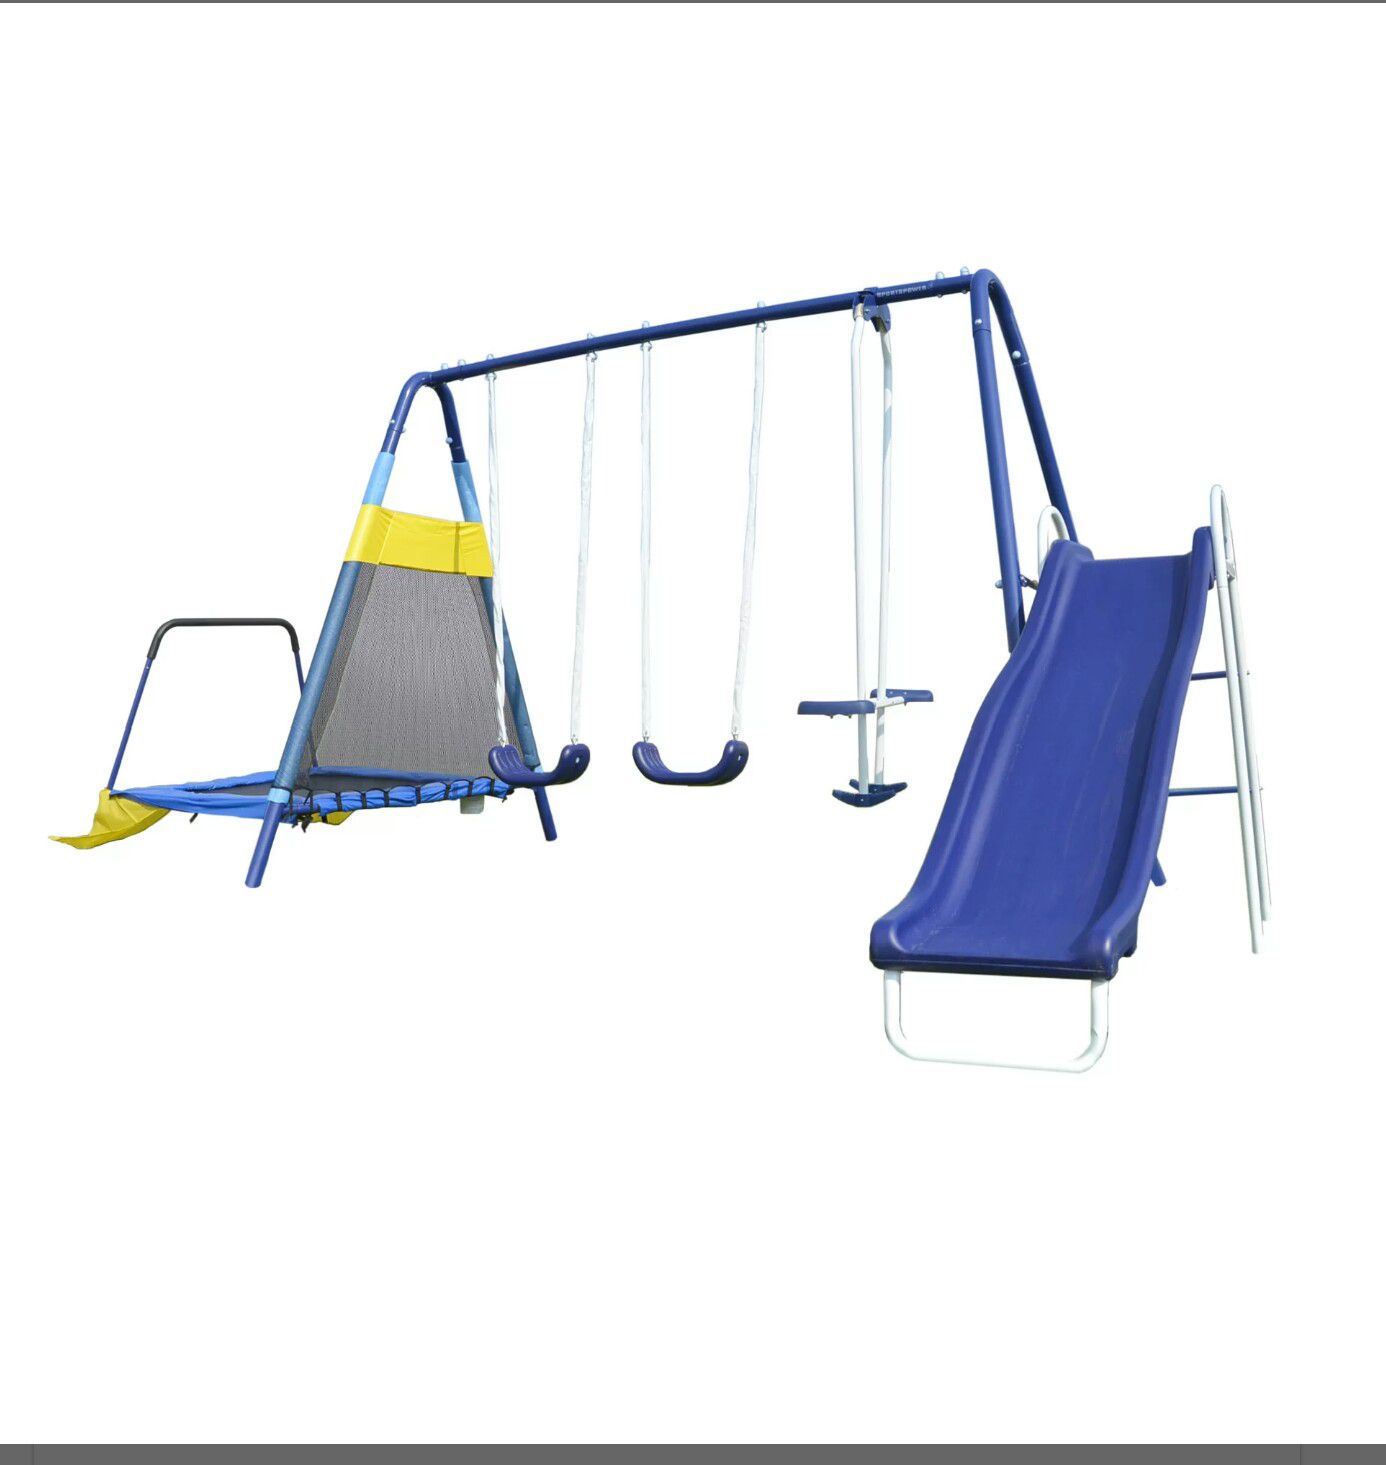 Almansor Trampoline/Slide and Swing Set ( in box) needs to be assembled